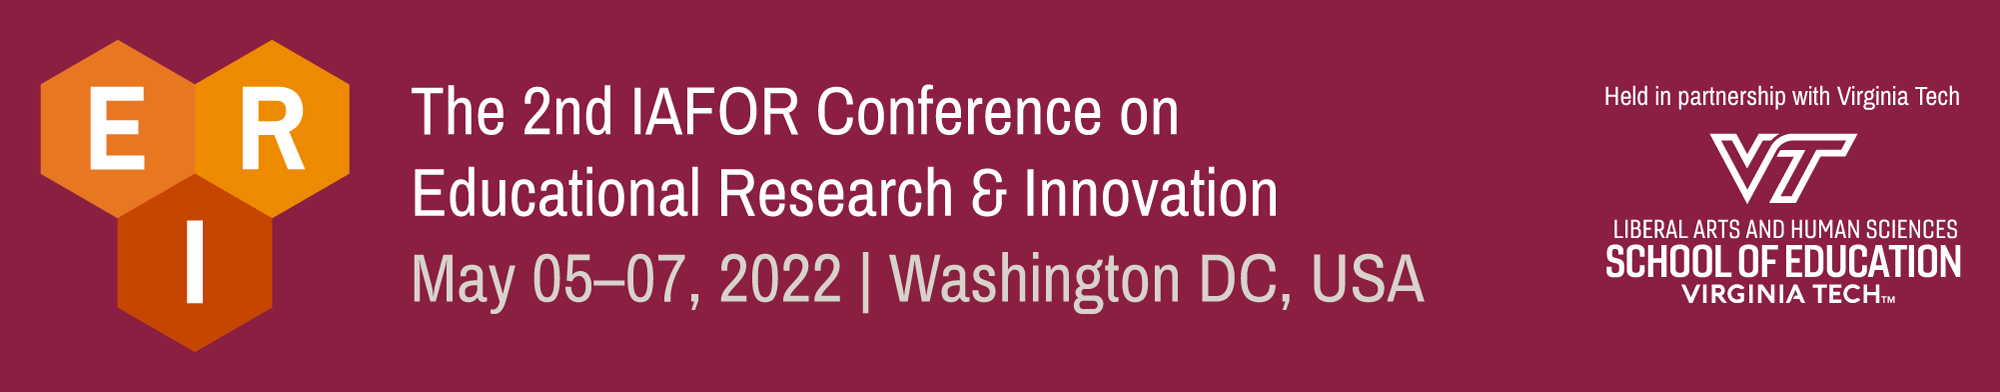 The IAFOR Conference on Educational Research & Innovation (ERI2022) Logo